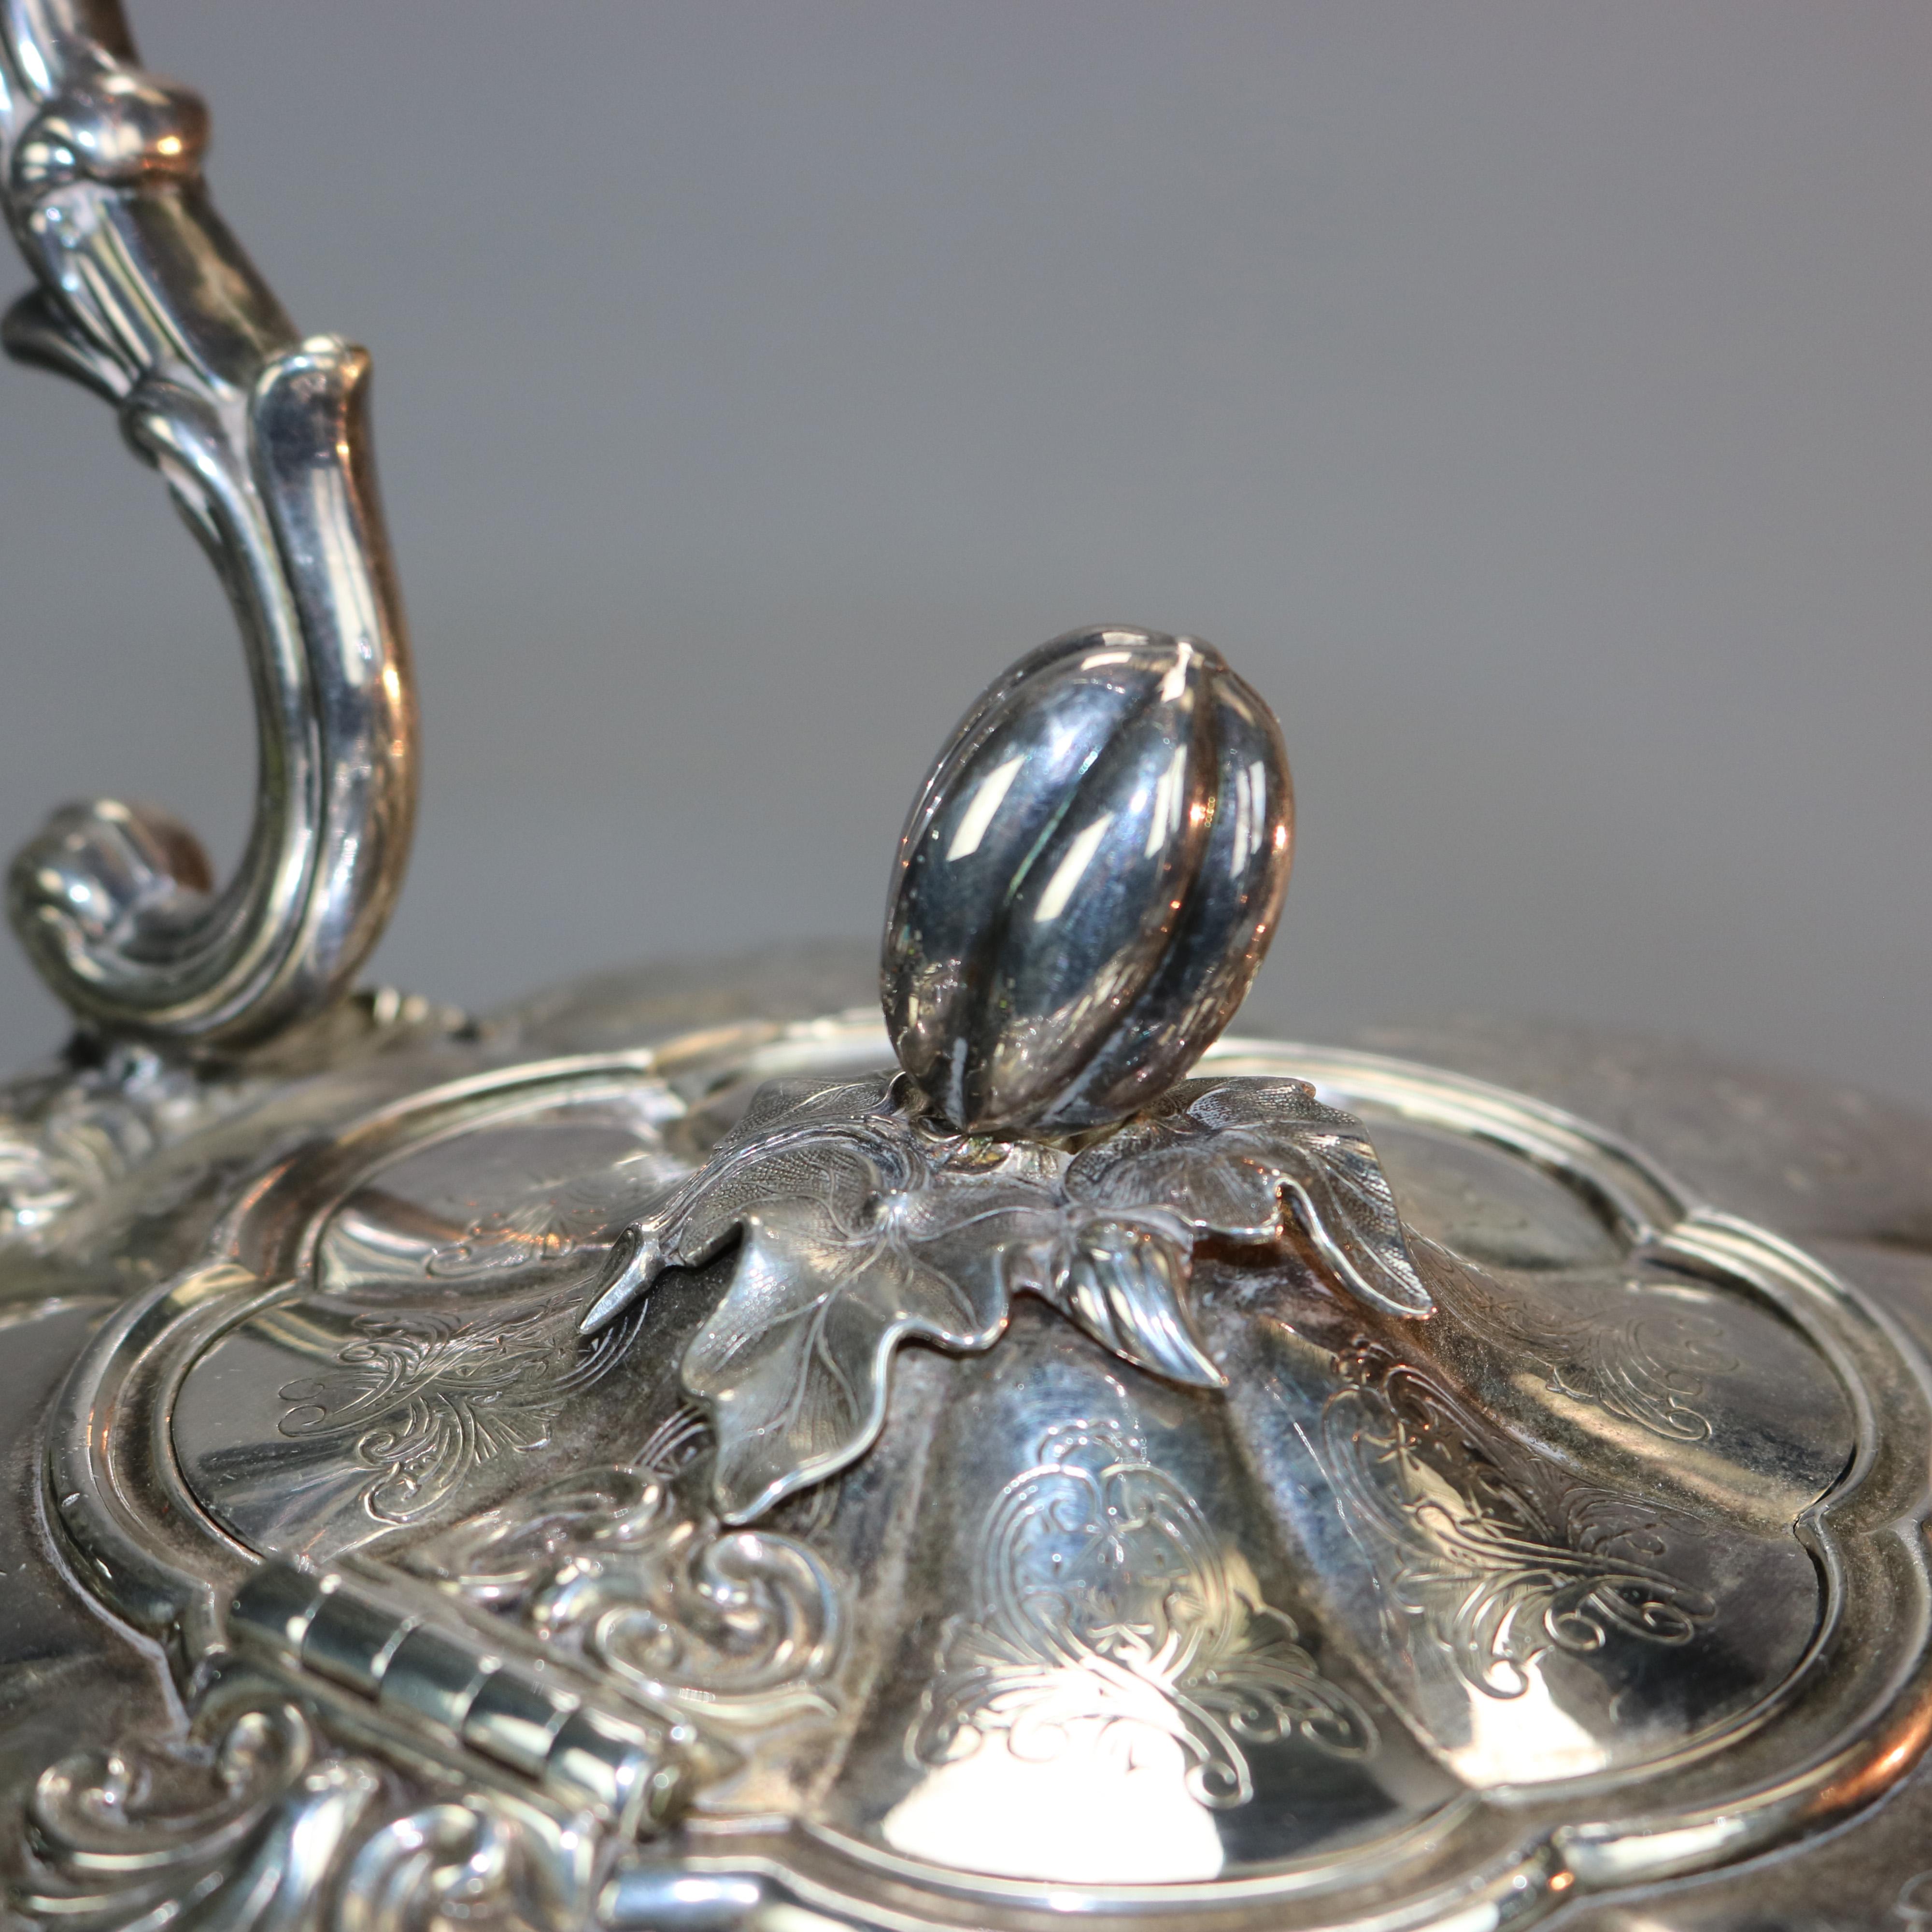 An antique George III silver plate tilting tea pot offers mellon form with foliate and floral engraved decoration, seated on pierced burner with cabriole legs terminating in shell form feet, stamped on base as photographed, c1830

Measures: 14.75